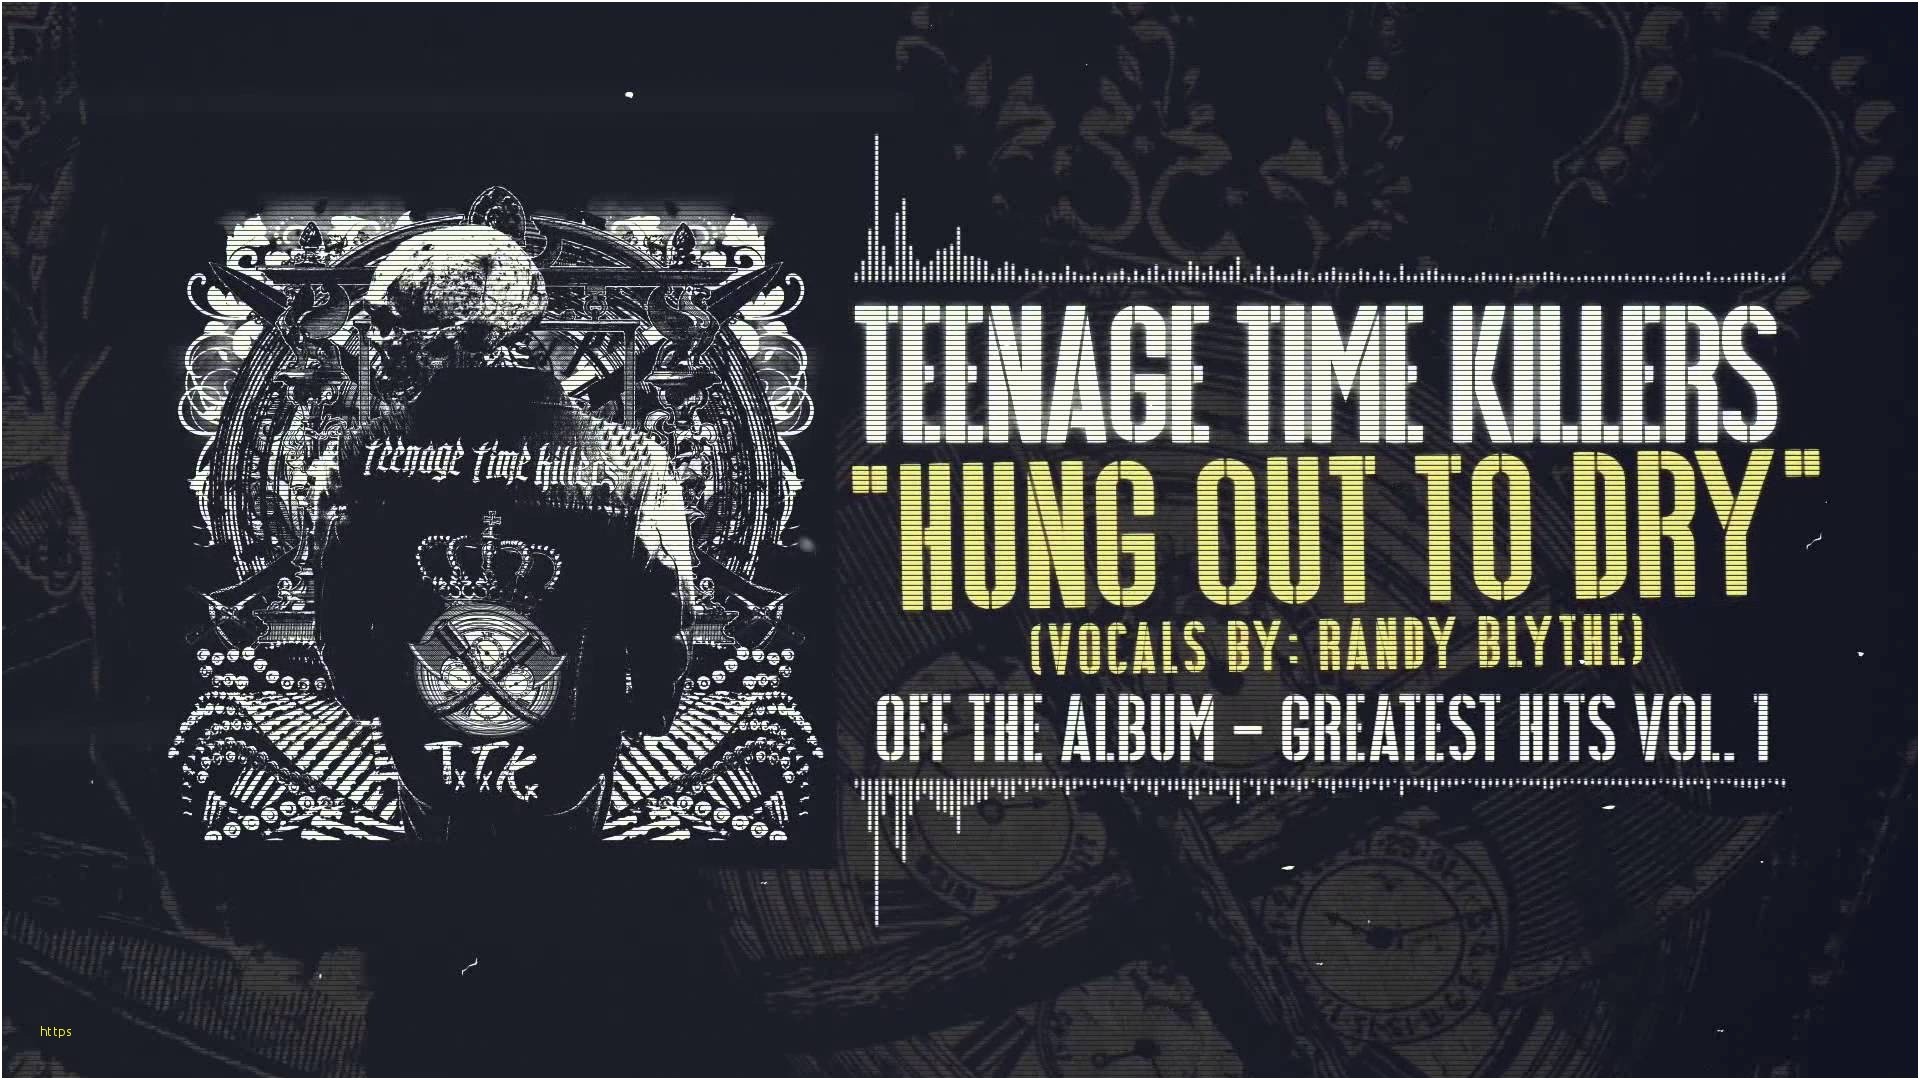 1920x1080 ... Chelsea Grin Wallpaper Lovely Teenage Time Killers Hung Out To Dry Feat  Randy Blythe ...